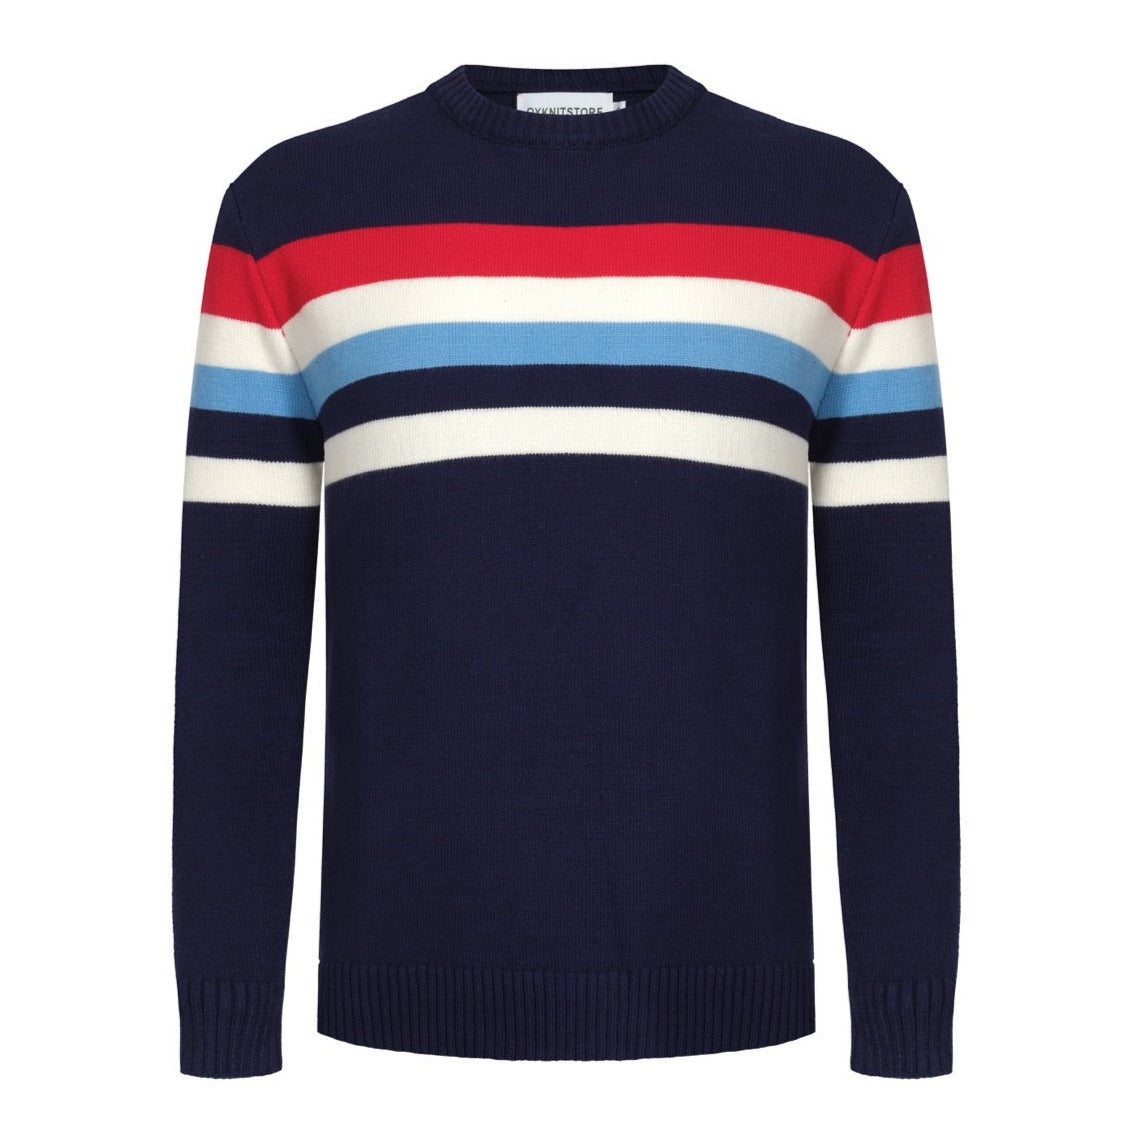 Men's Navy Blue Knitted Sweater With Chest Stripe Design – OXKnit